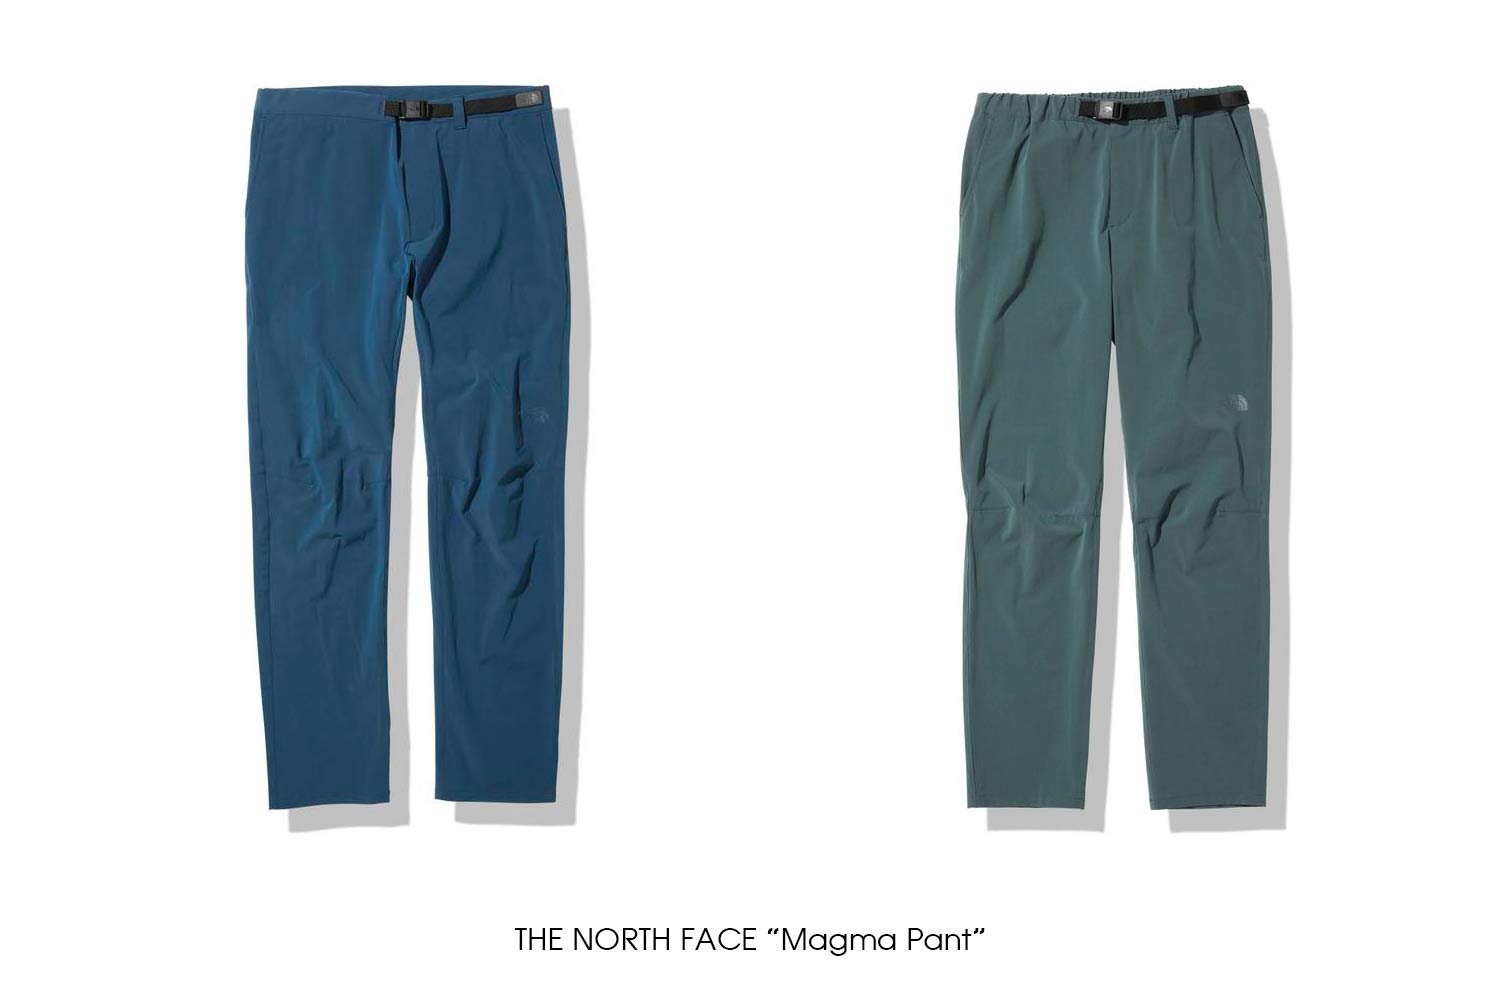 THE NORTH FACE "Magma Pant"